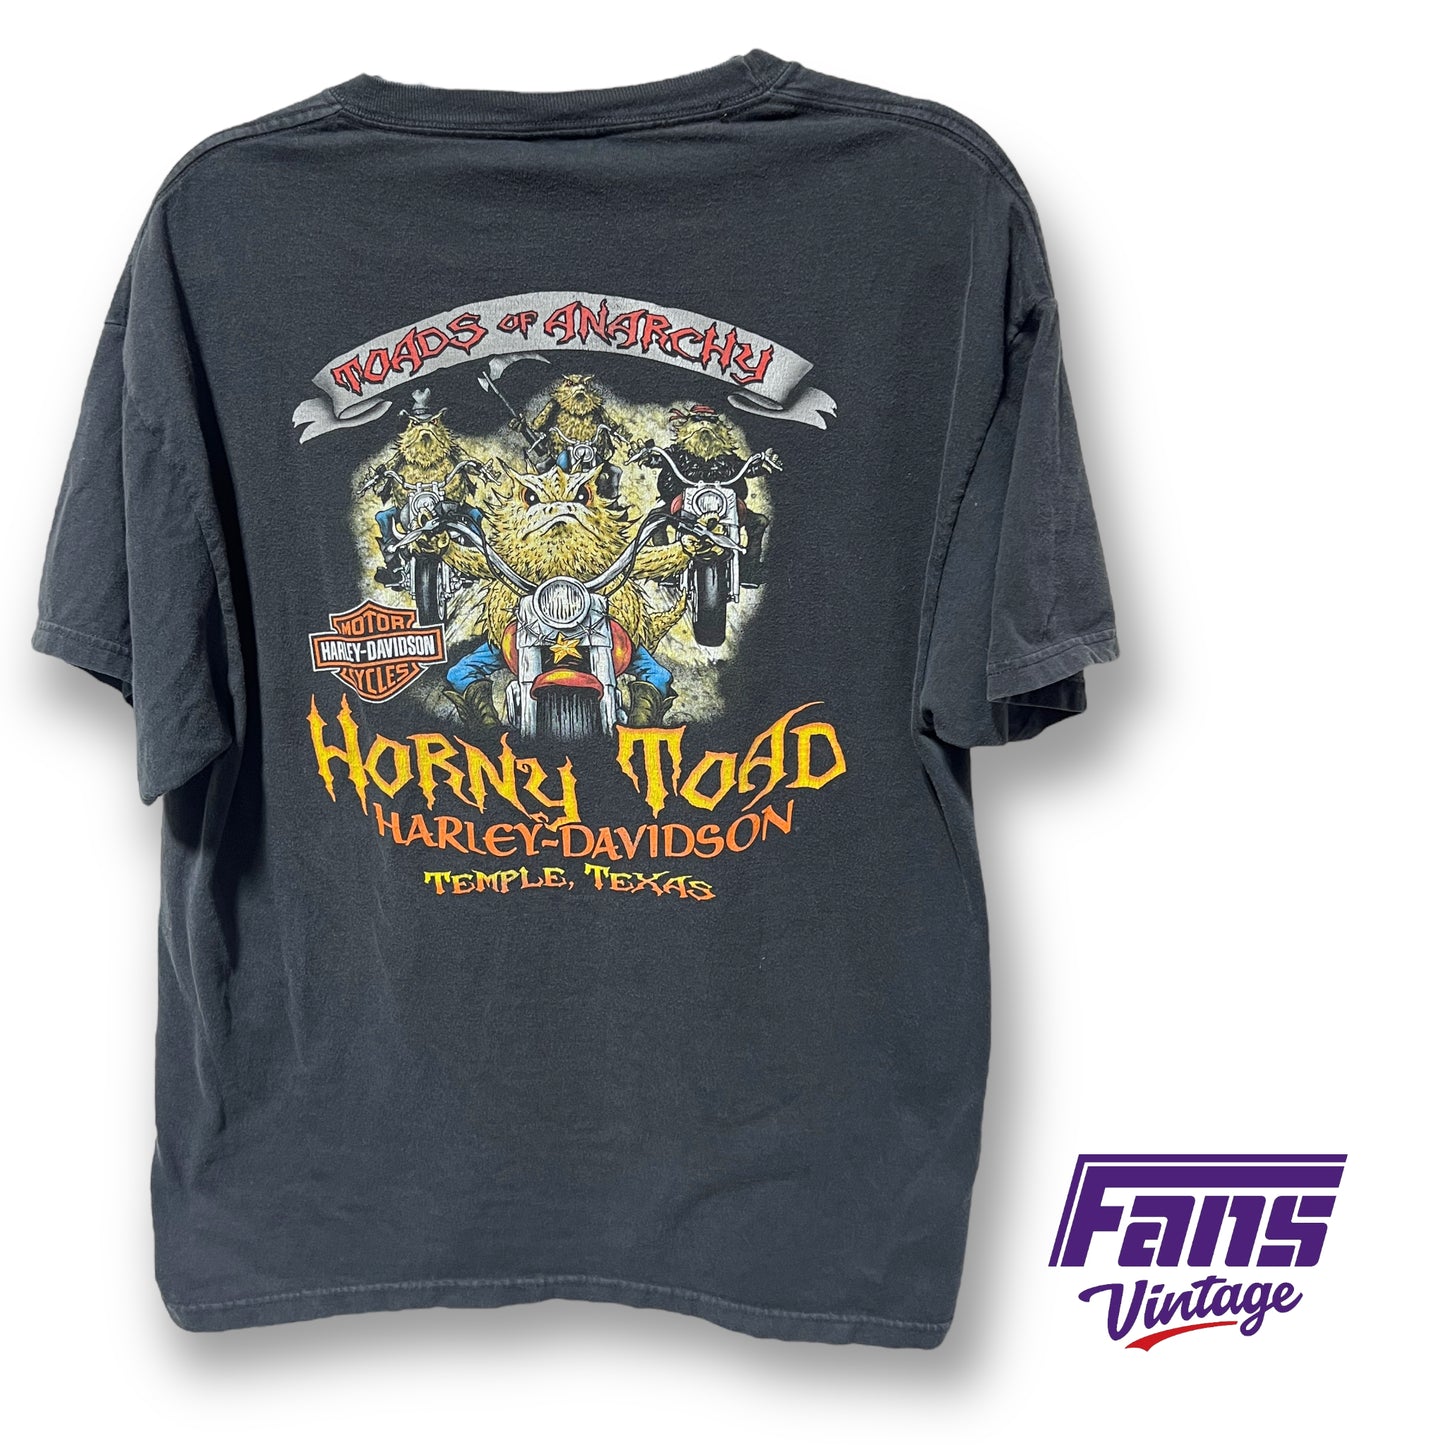 Rare Vintage Horny Toad “Toads of Anarchy” Harley Tee